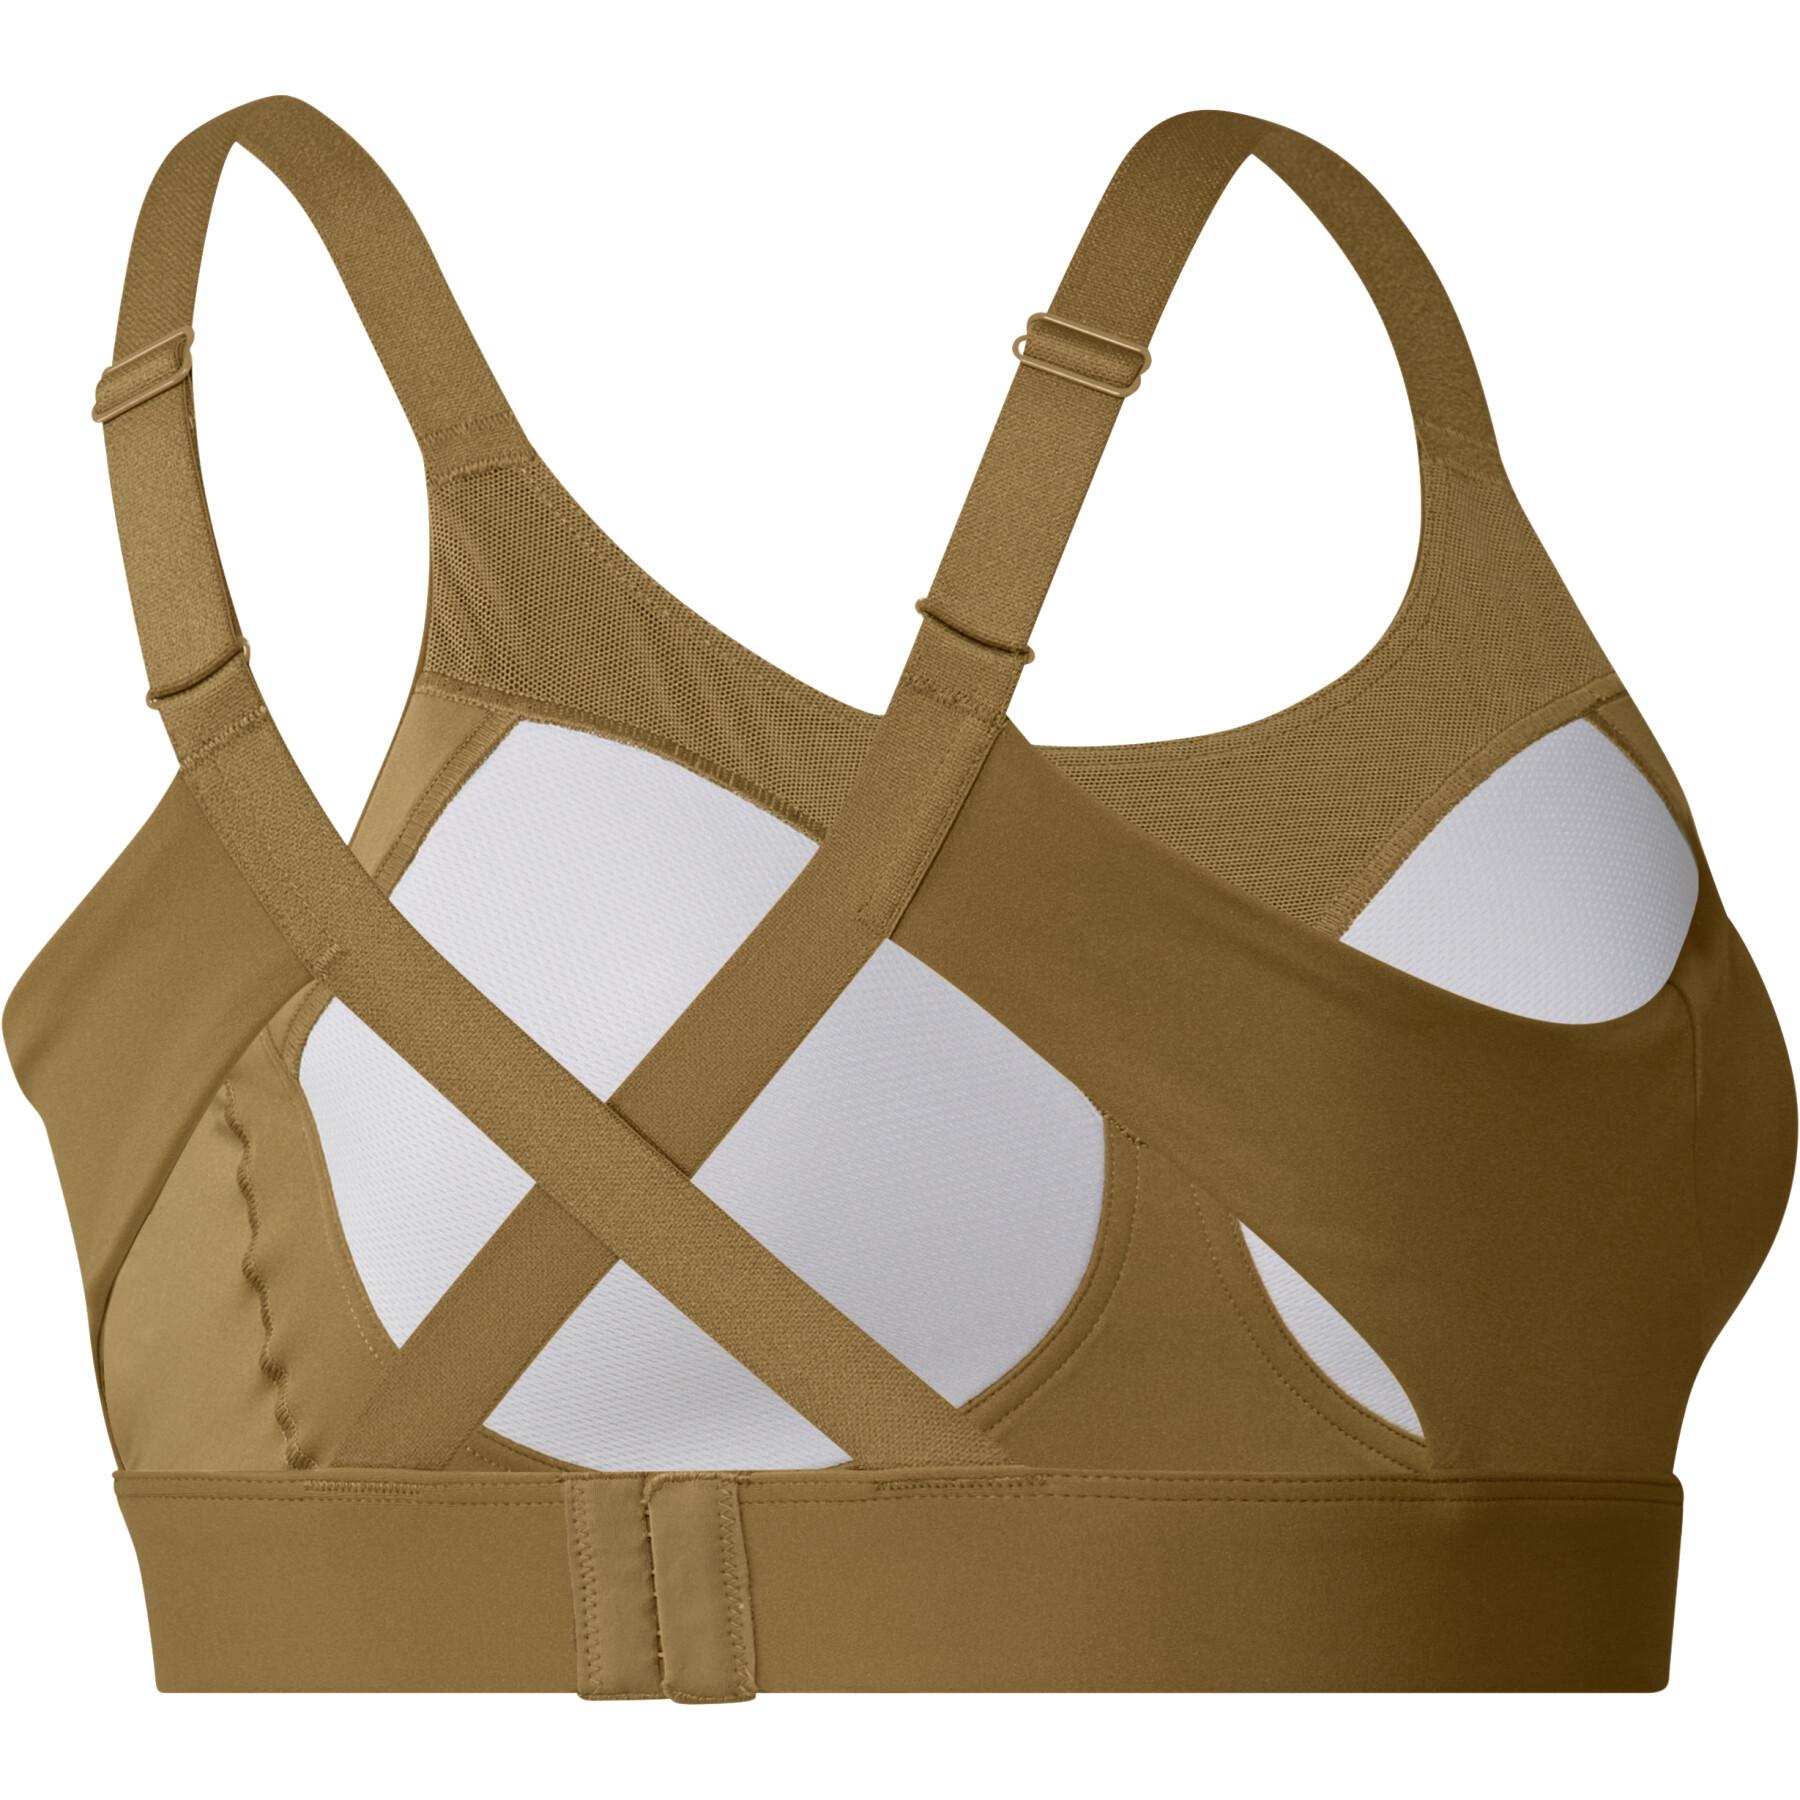 High support bra made to measure for women adidas Impact